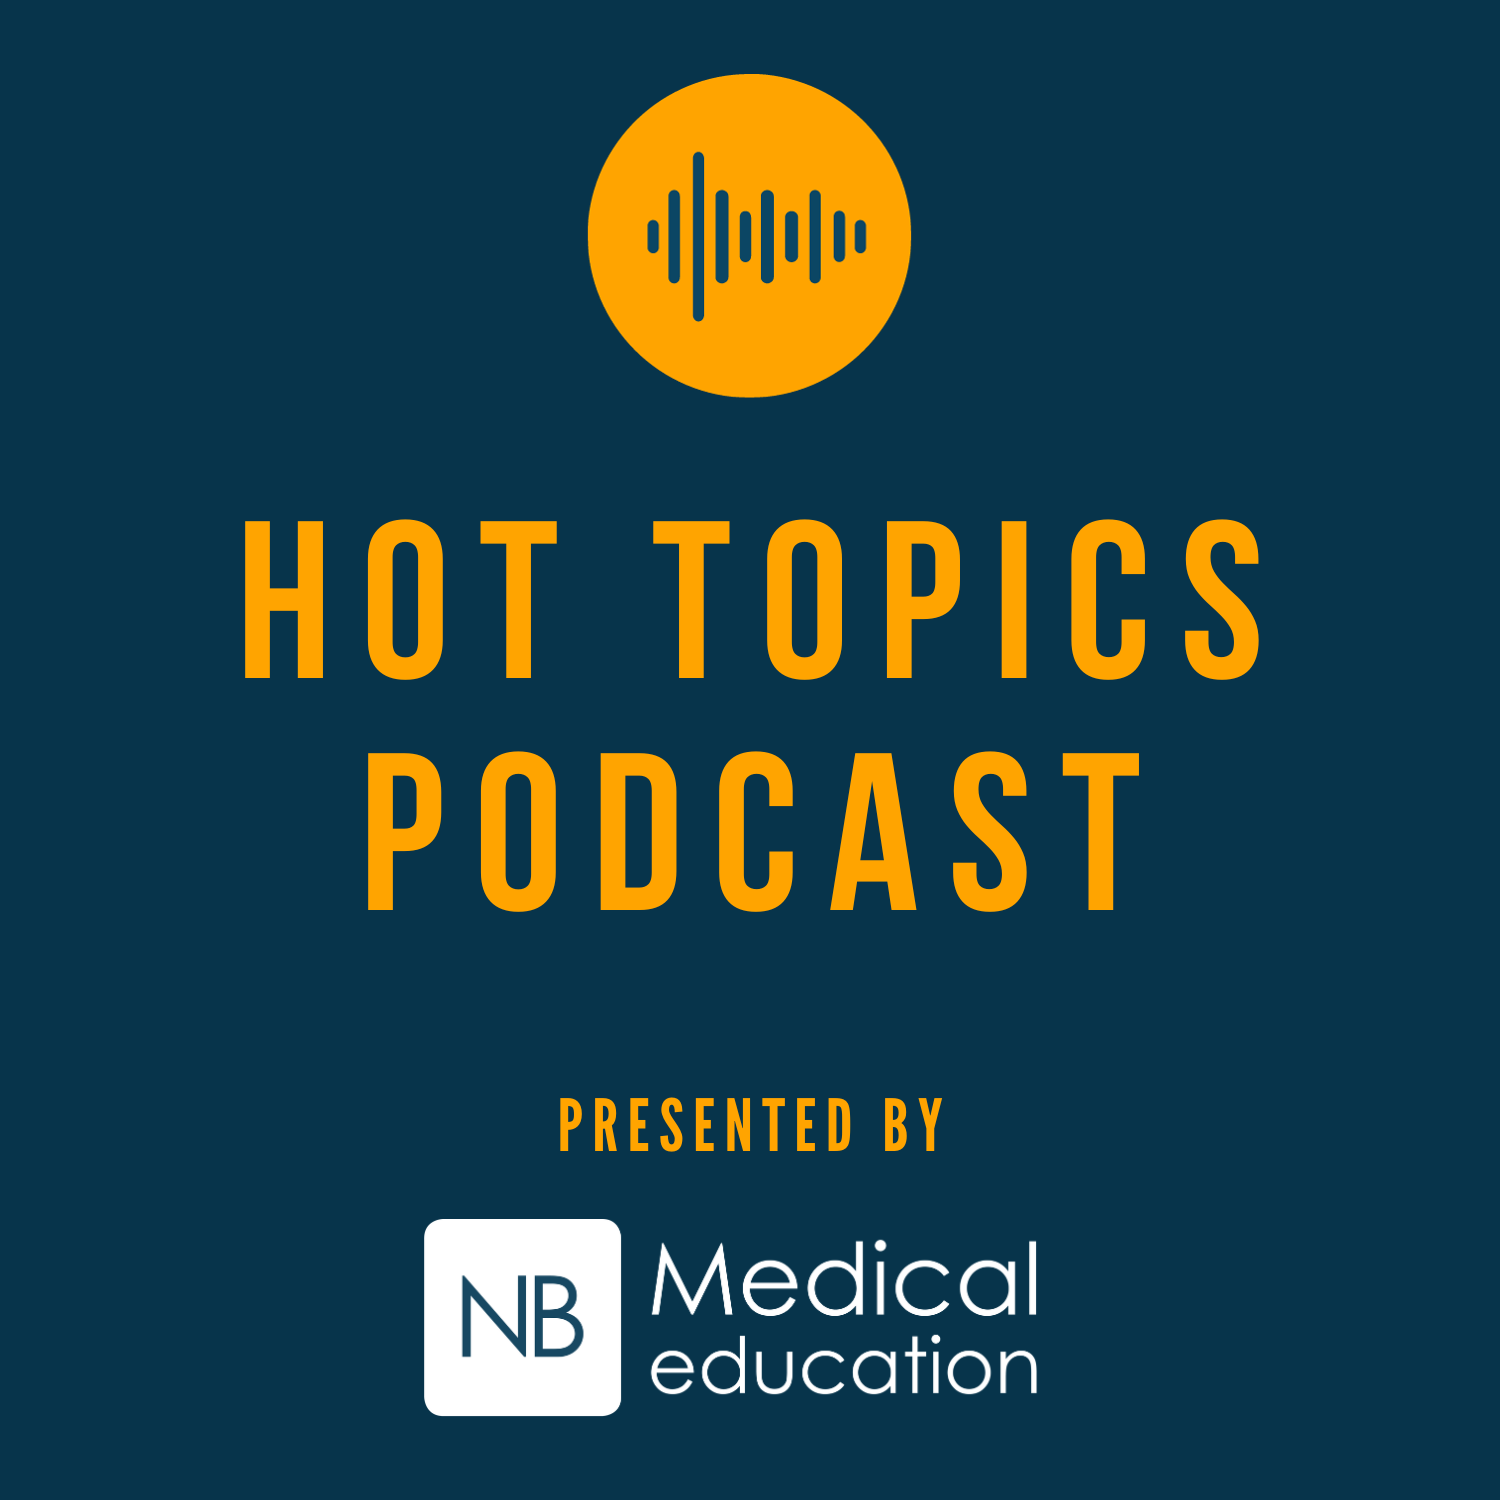 S1 E6 - Alcohol and AF, Colchicine and Cardiac Events, Anti-virals and Influenza image